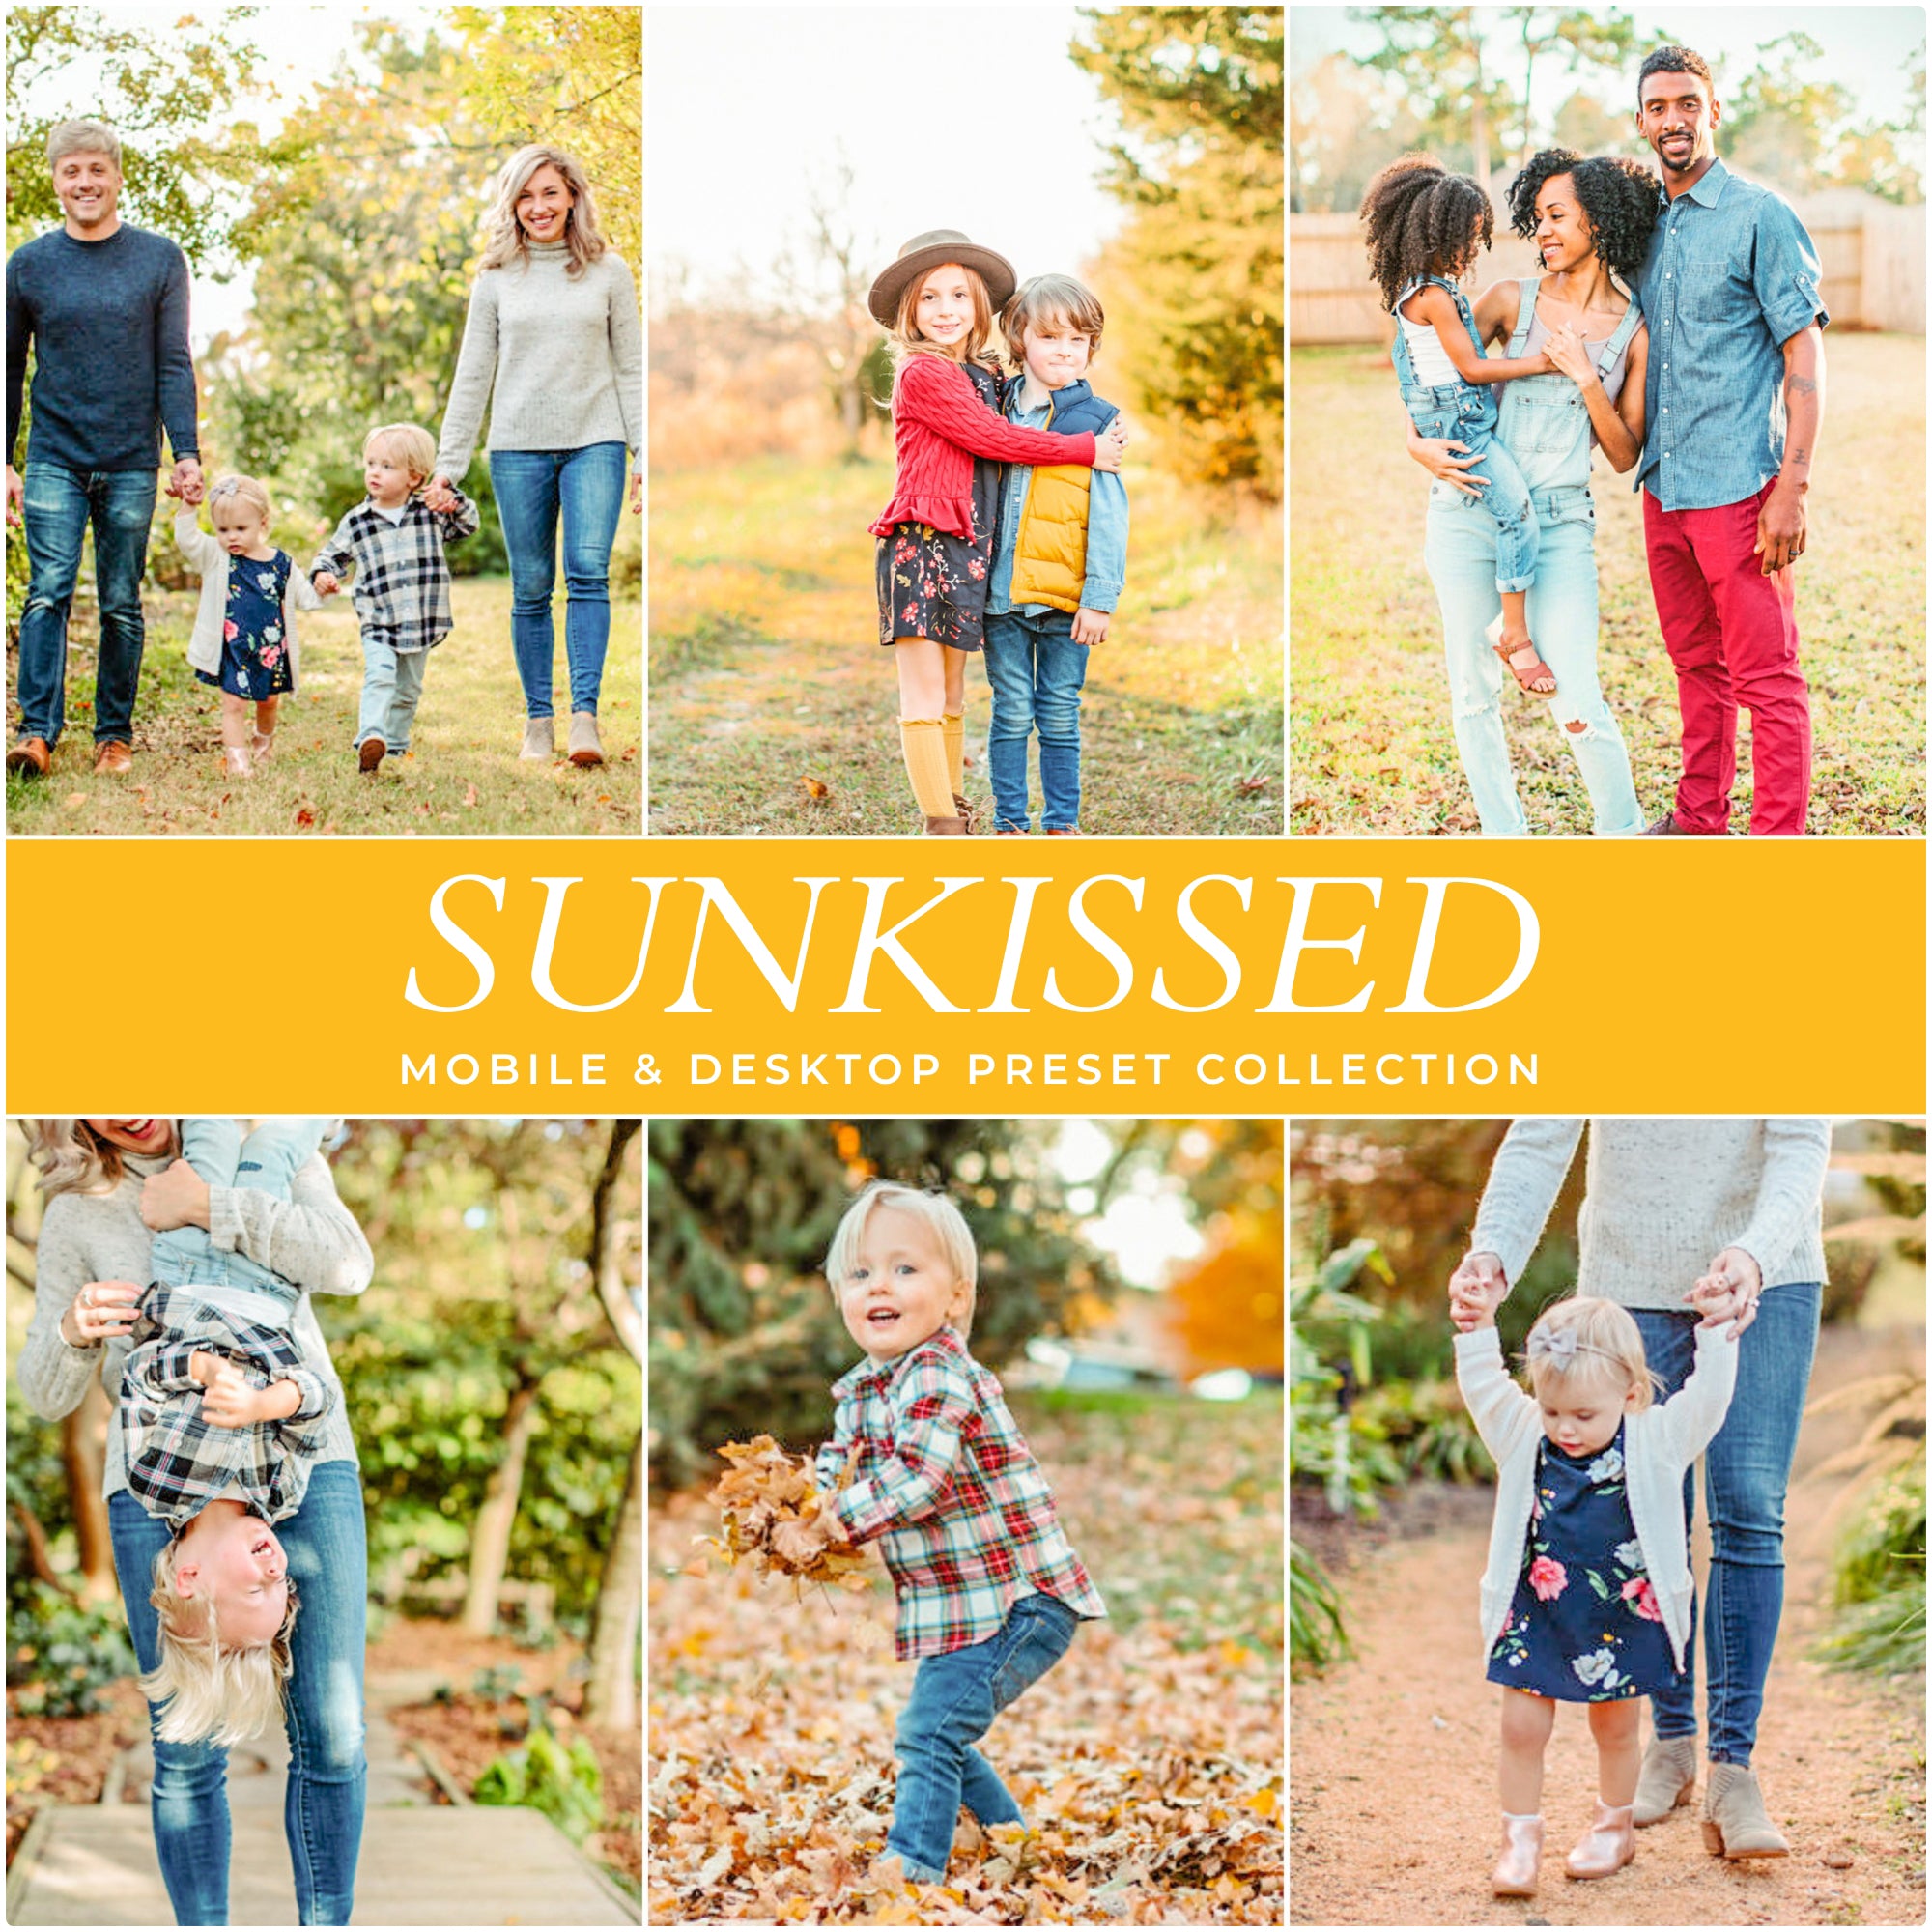 Sunkissed Fall Lightroom Presets For Photographers and Instagram Influencers Photo Editing In Adobe Lightroom By Lou And Marks Presets